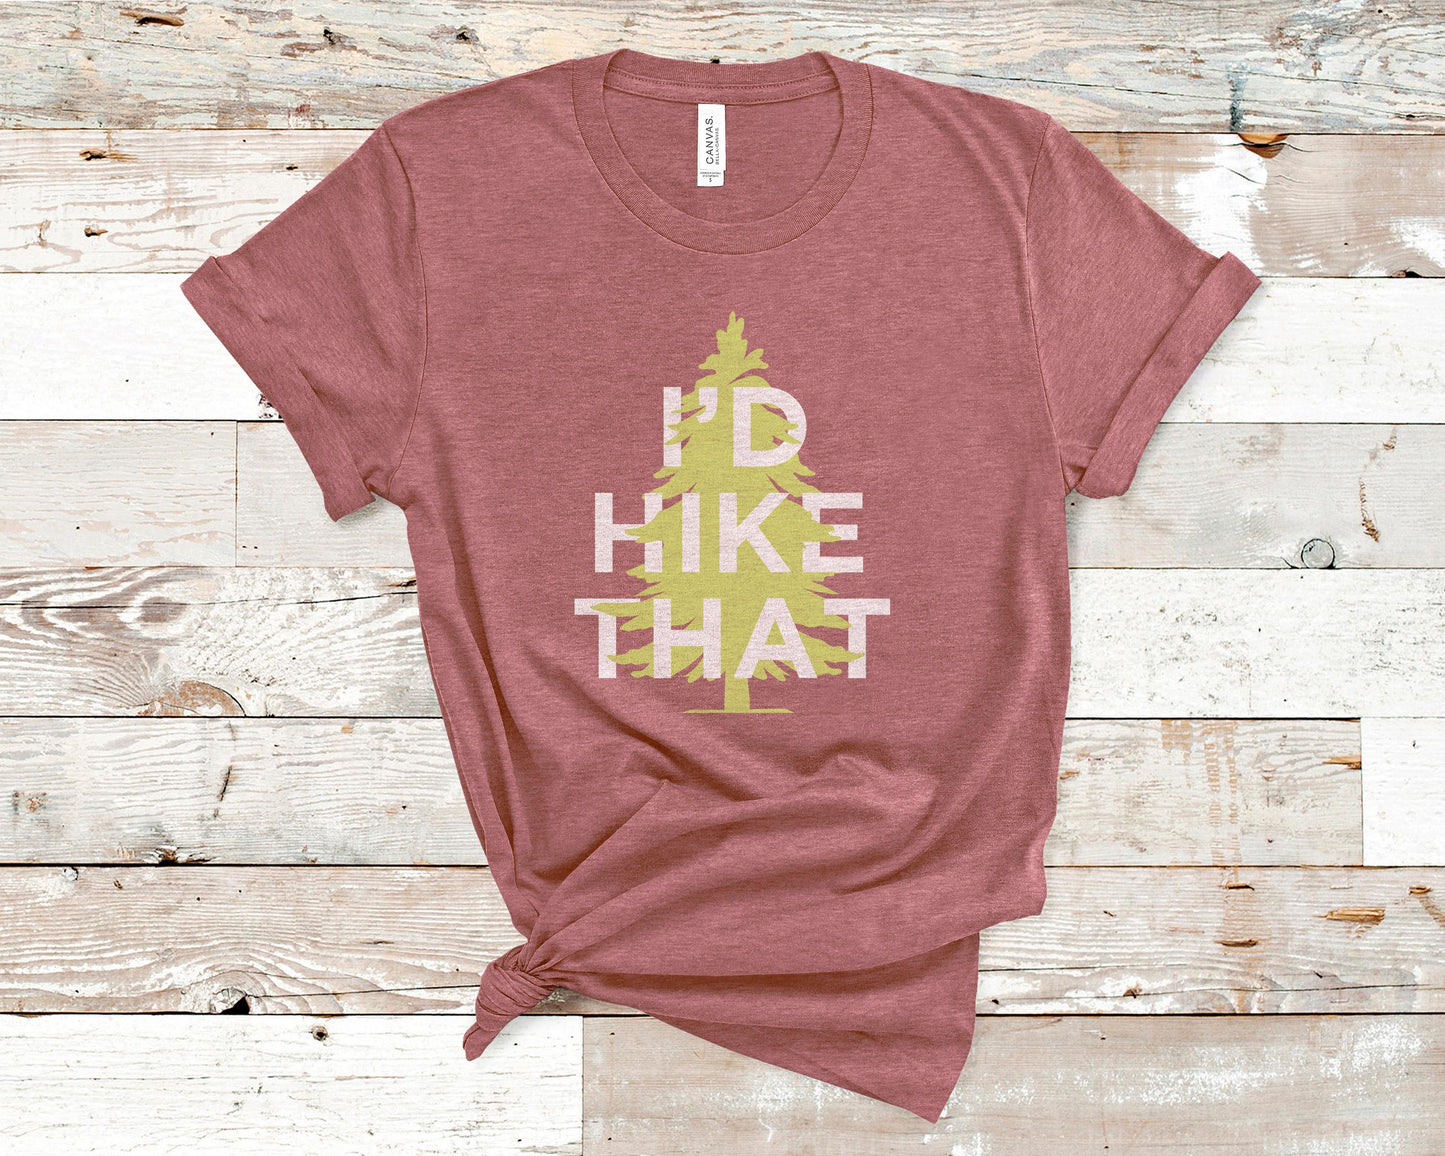 I'd Hike That - Travel/Vacation